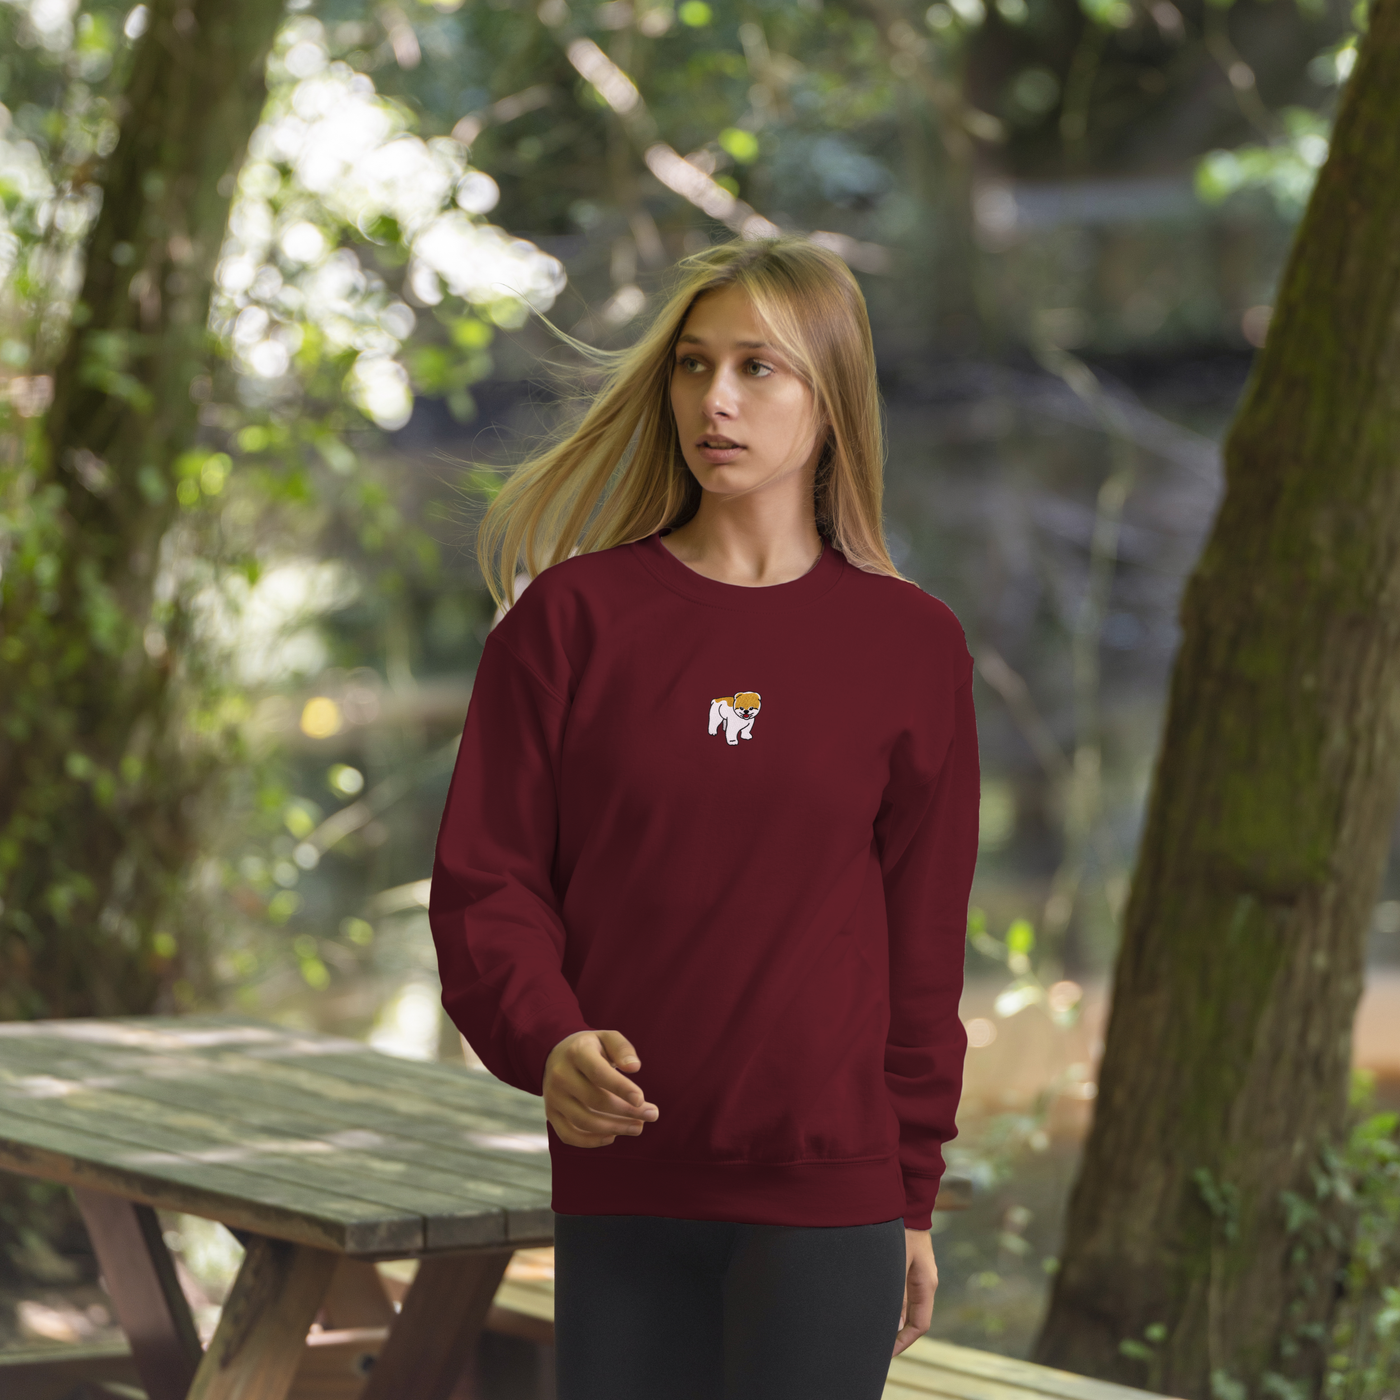 Bobby's Planet Women's Embroidered Pomeranian Sweatshirt from Paws Dog Cat Animals Collection in Maroon Color#color_maroon